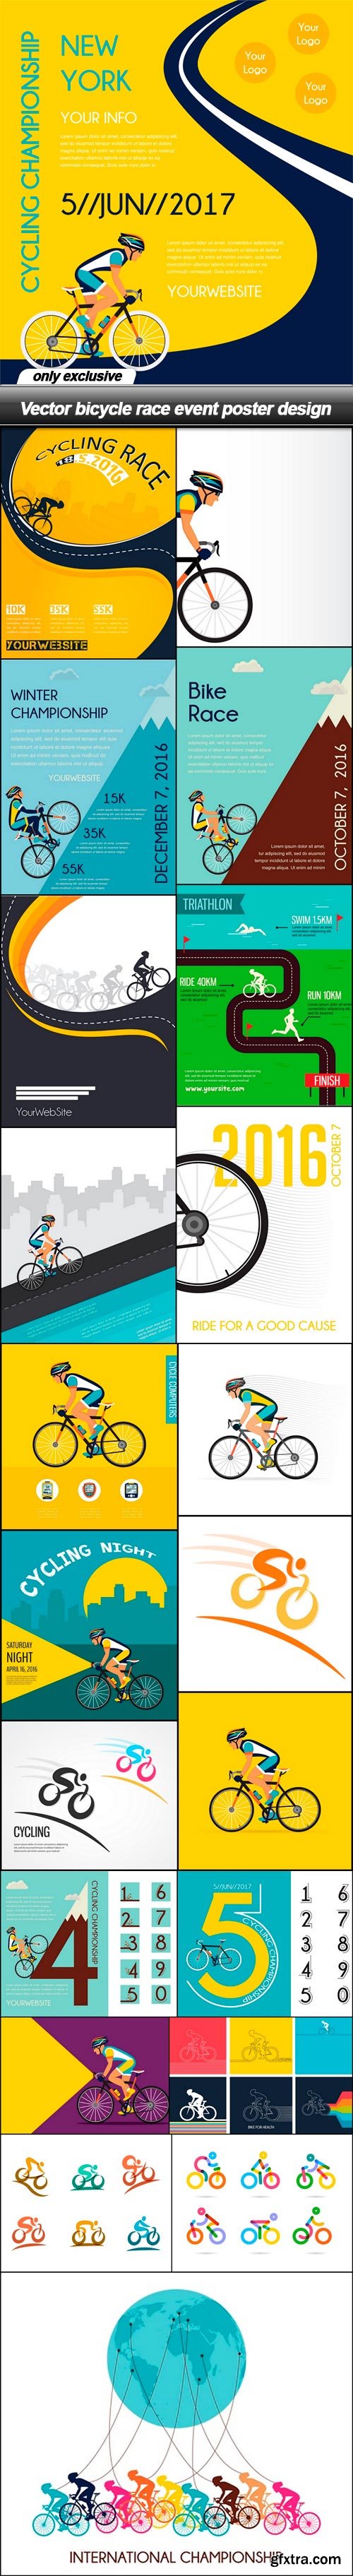 Vector bicycle race event poster design - 22 EPS